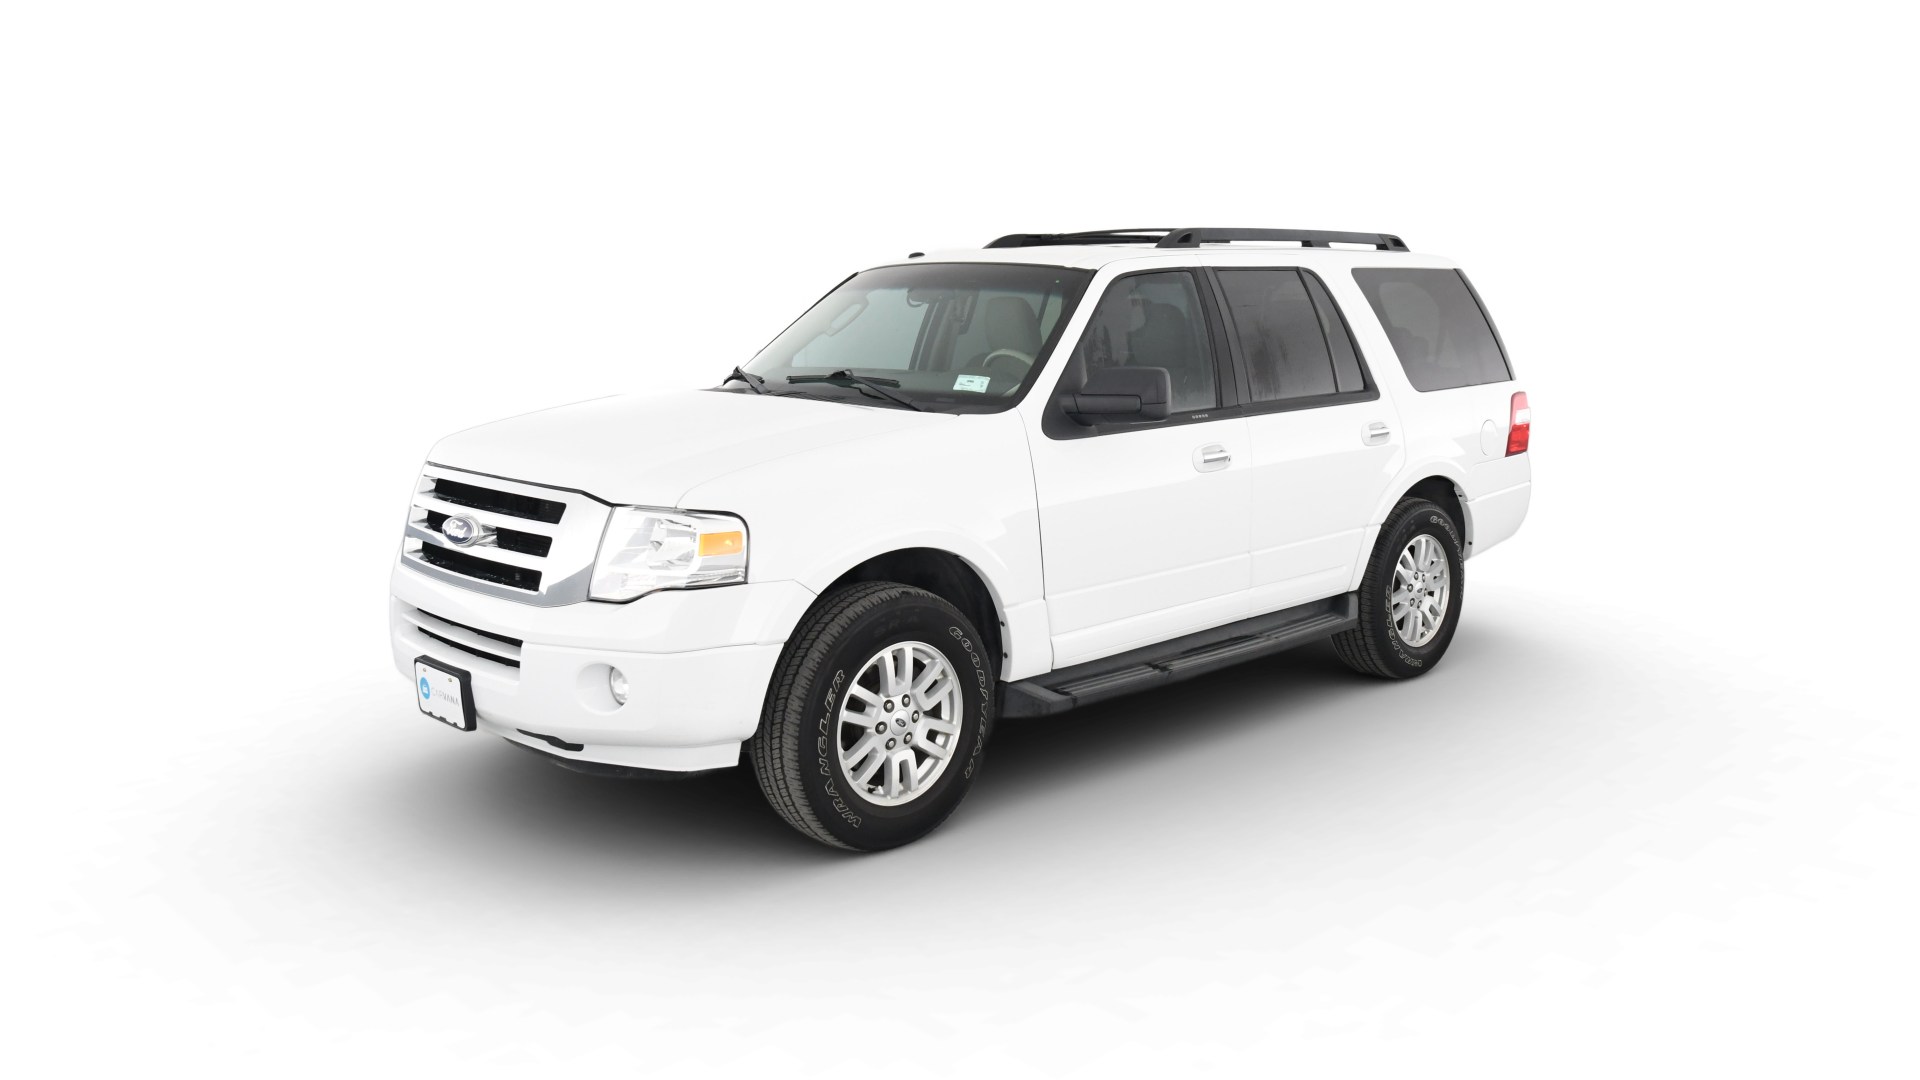 Ford Expedition model image.